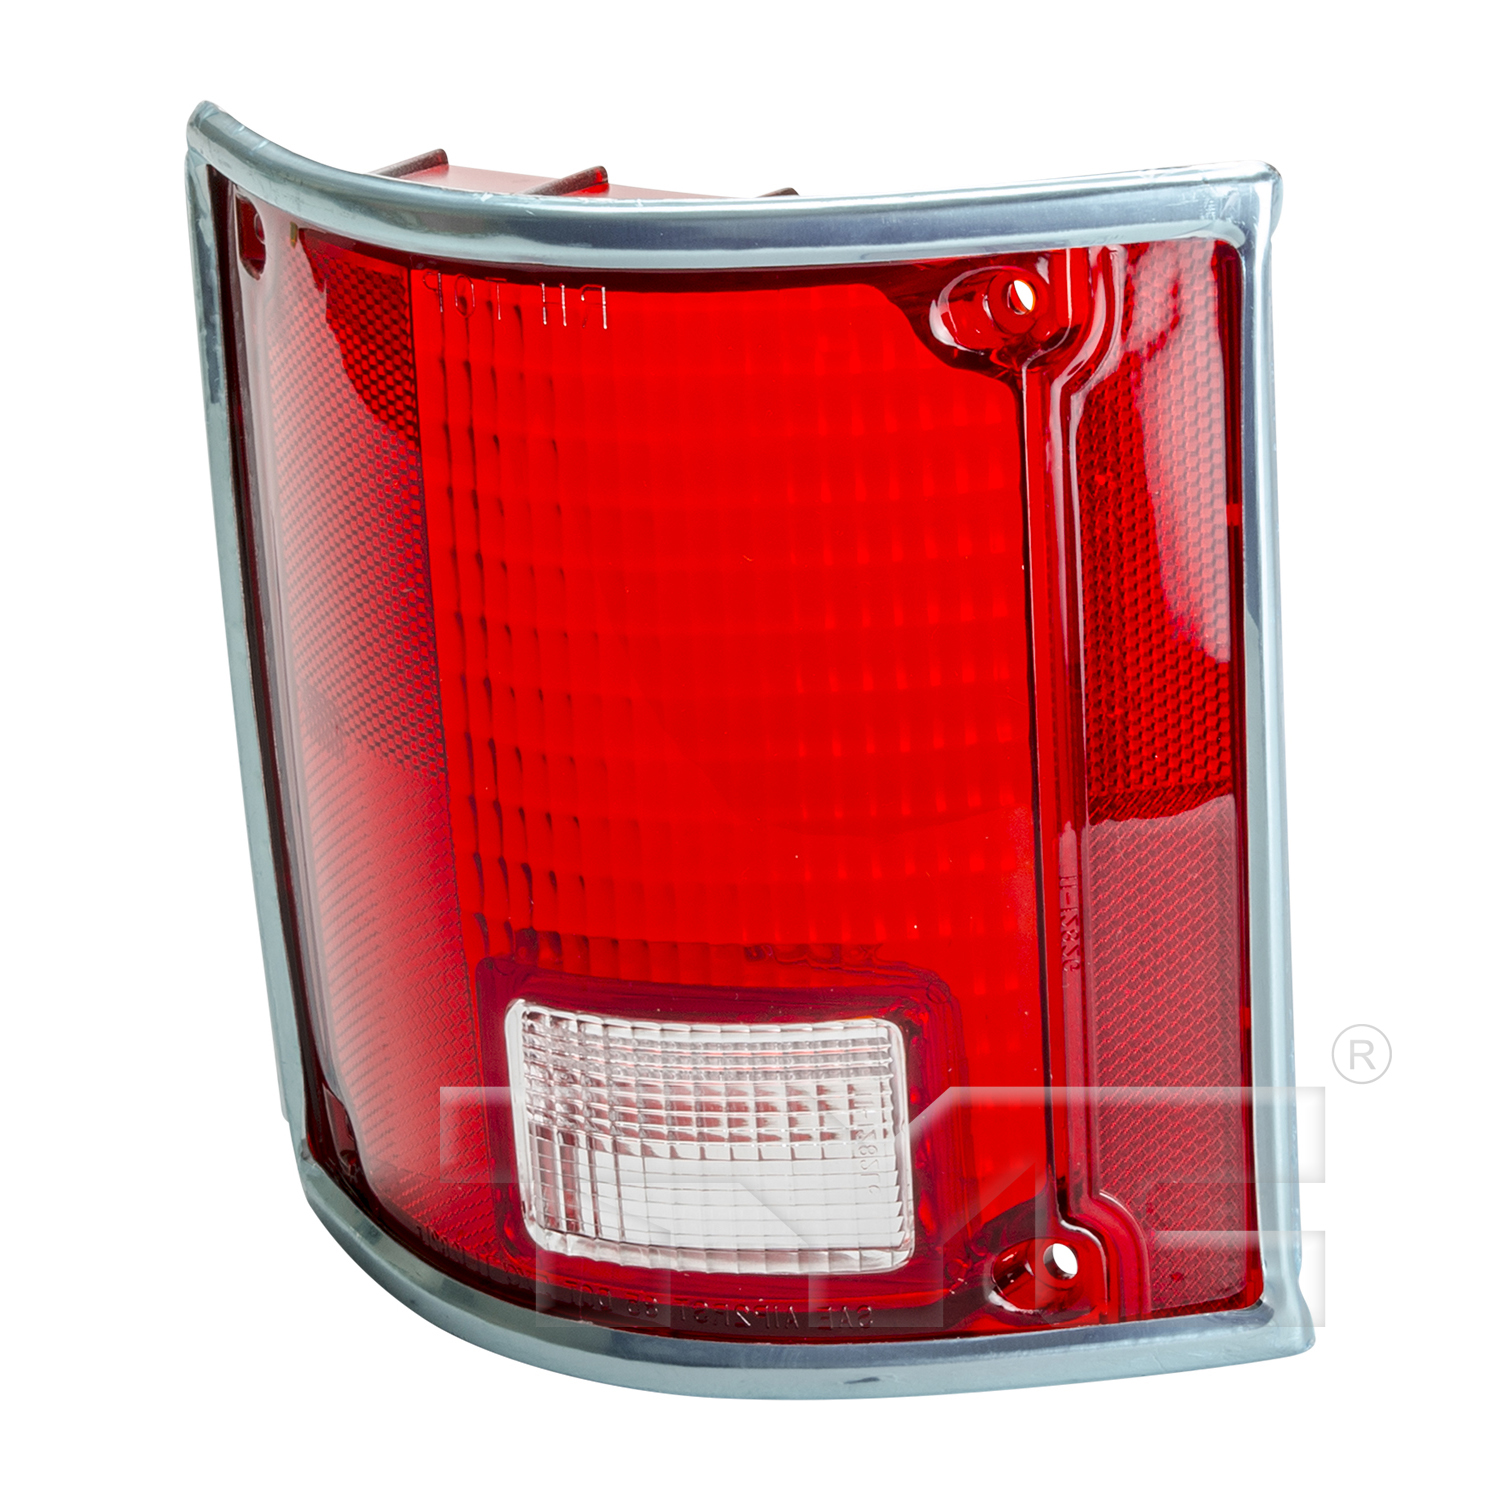 Aftermarket TAILLIGHTS for GMC - C3500, C3500,79-87,LT Taillamp lens